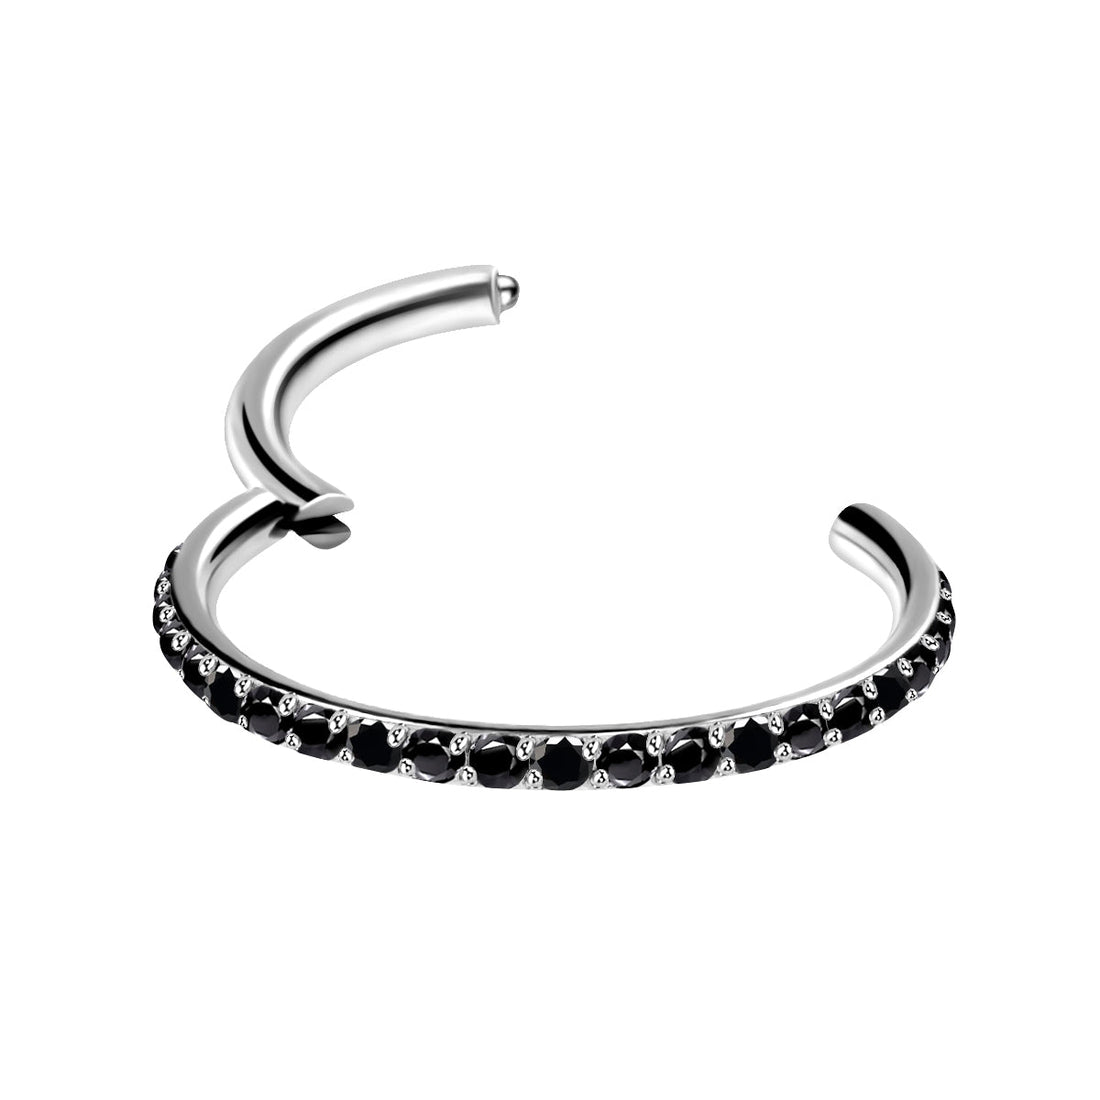 Clicker Piercing for Conch, Septum and hoop With Black Gems Surgical Steel - Dr. Piercing Aftercare